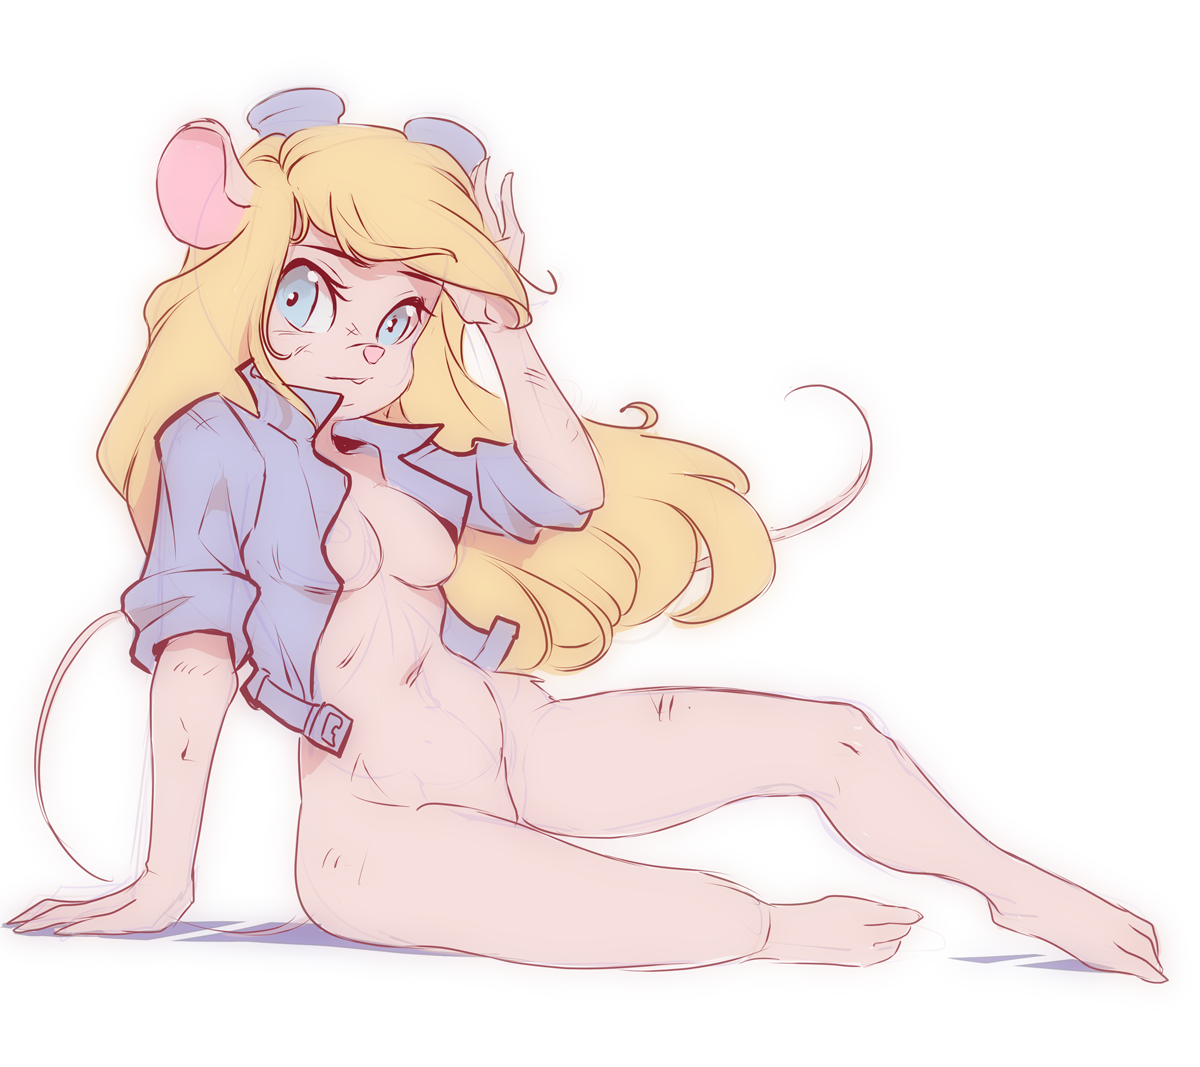 Gadget - NSFW, Gadget hackwrench, Art, Anthro, Chip and Dale, Walt disney company, Hand-drawn erotica